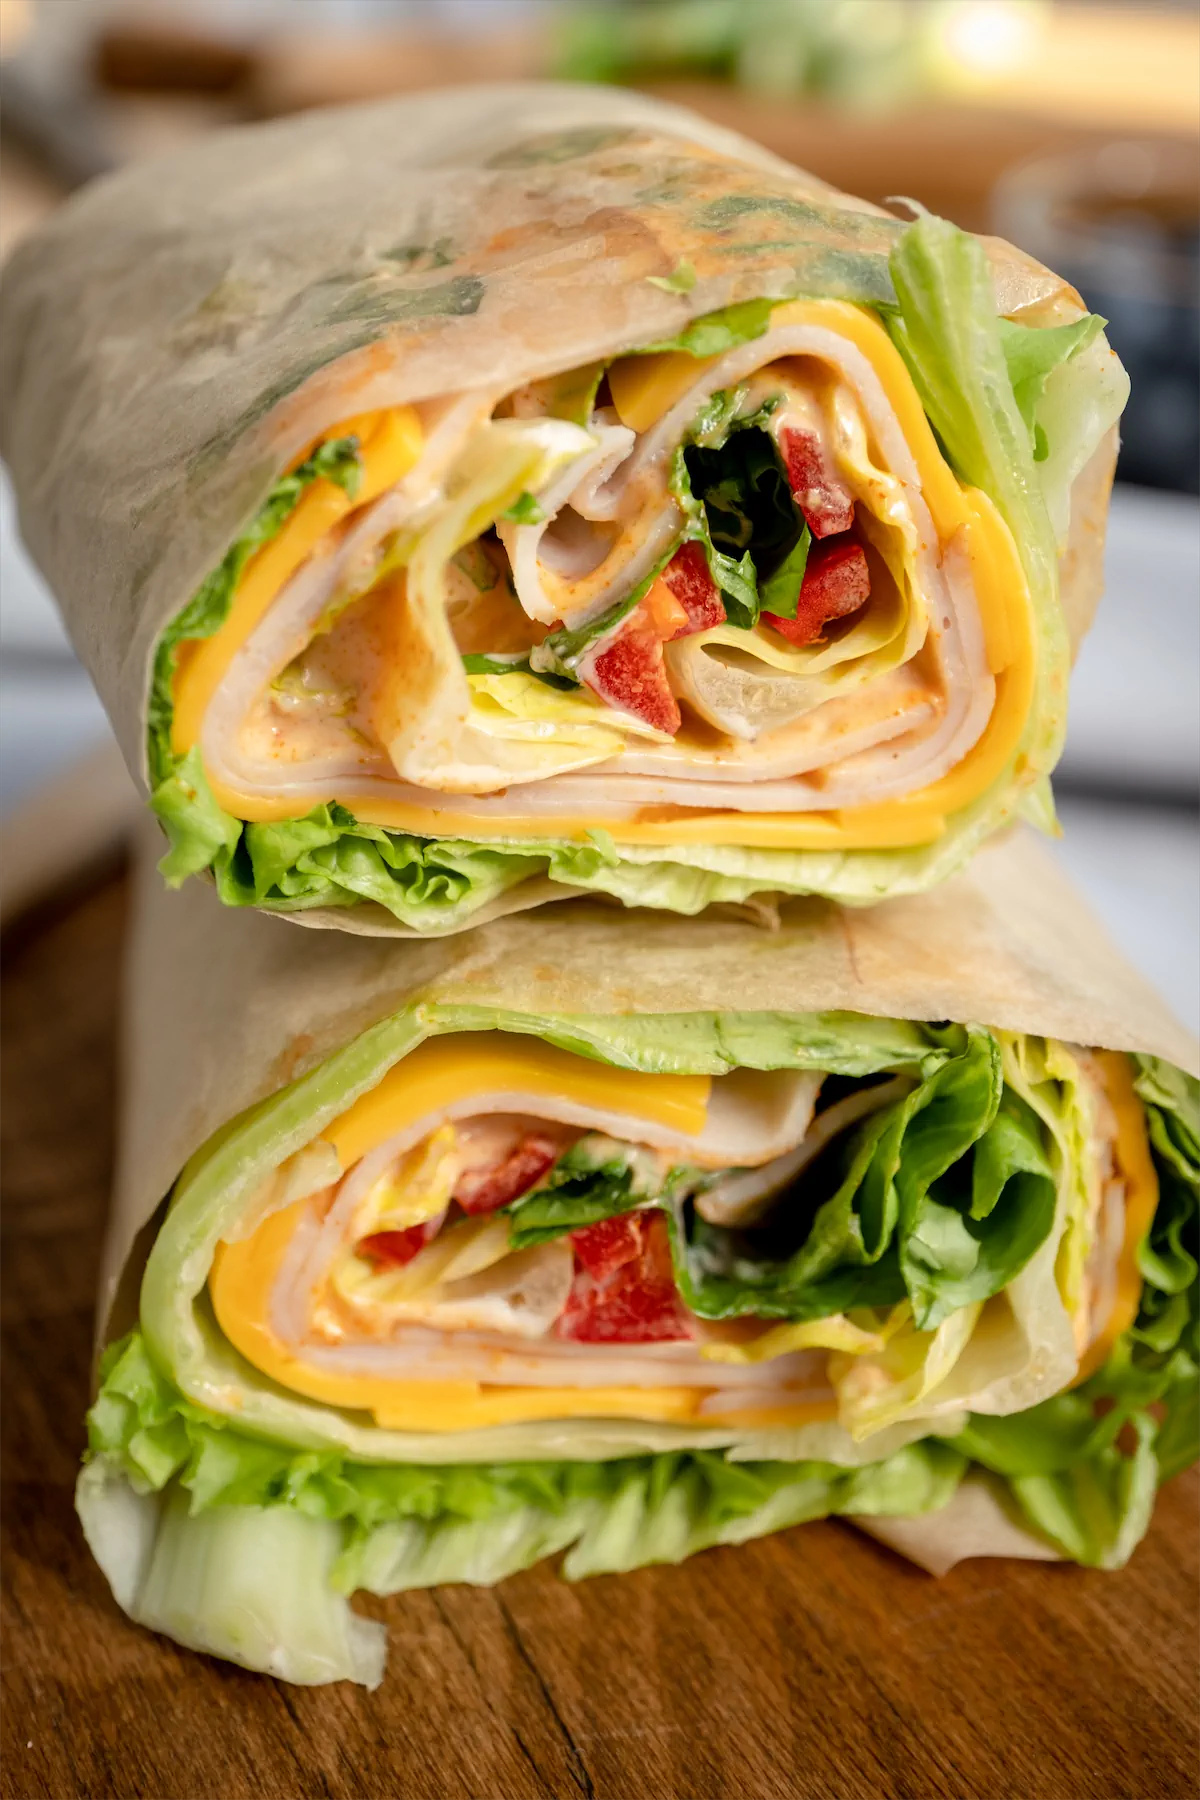 Low carb wraps with herb mayo served.